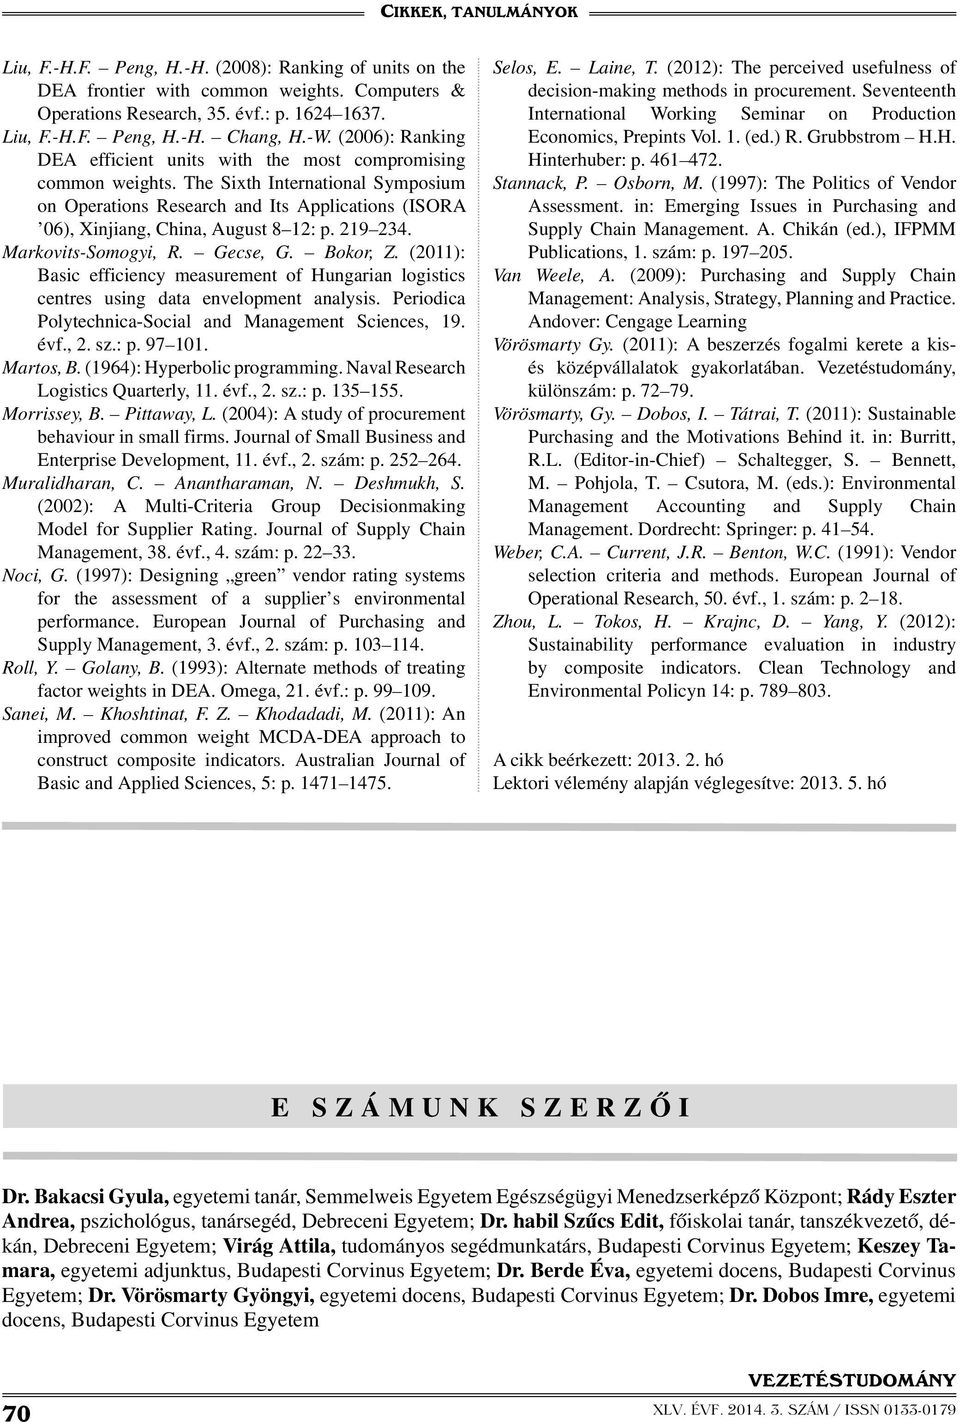 The Sixth International Symposium on Operations Research and Its Applications (ISORA 06), Xinjiang, China, August 8 12: p. 219 234. Markovits-Somogyi, R. Gecse, G. Bokor, Z.